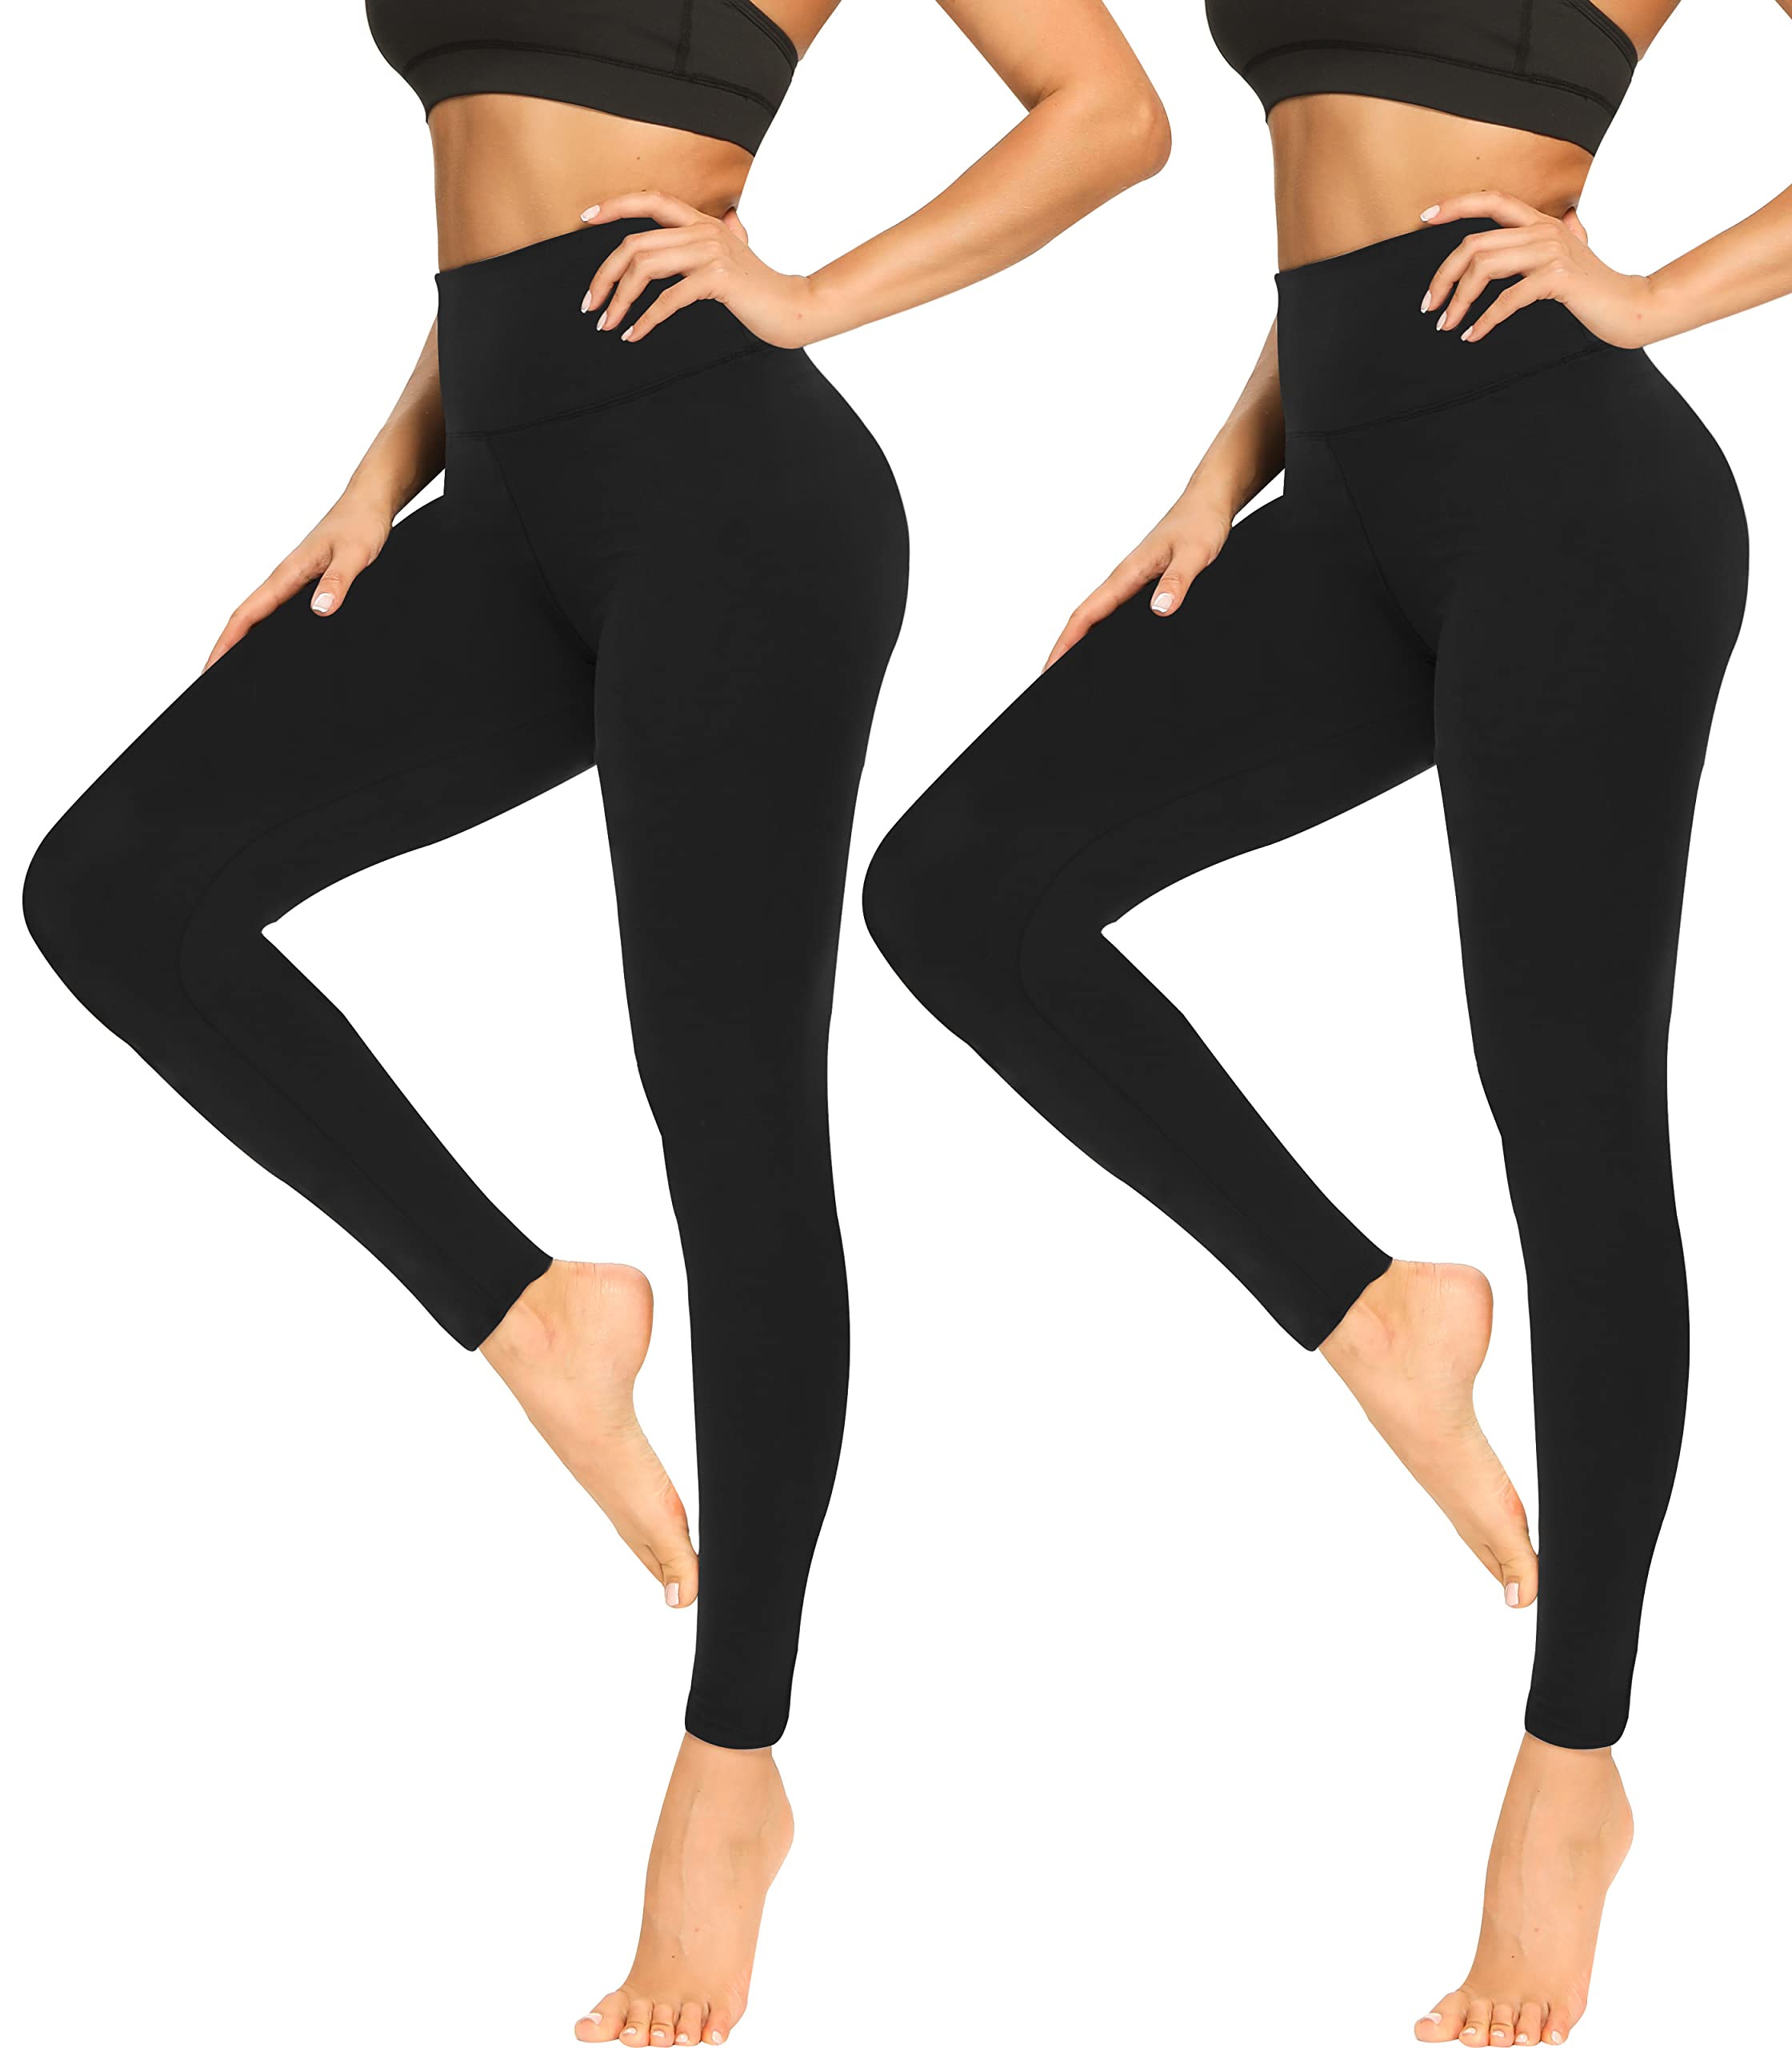 Women black leggings are a versatile and essential wardrobe staple for women, offering endless possibilities for creating